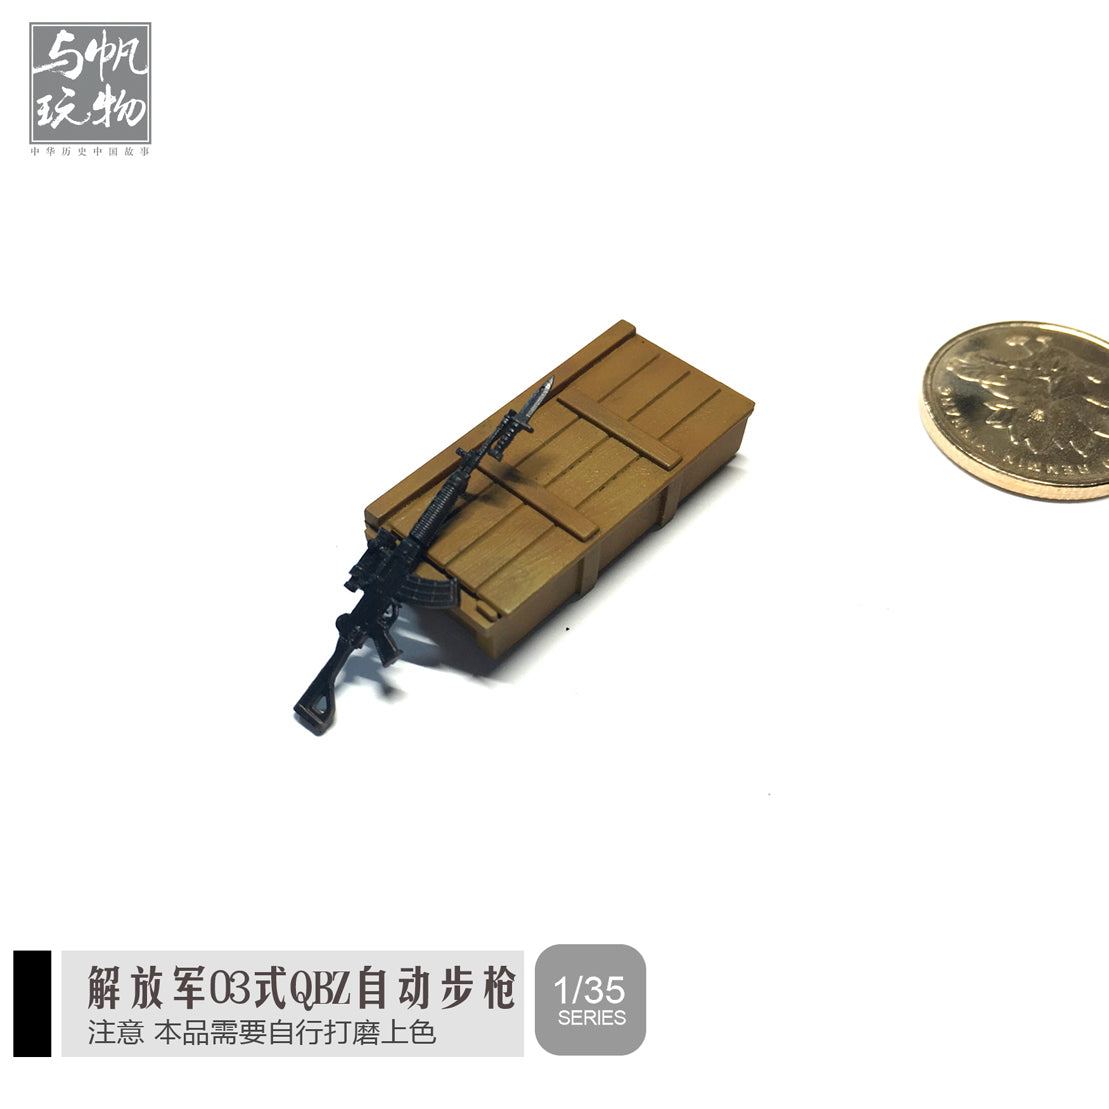 1/35 China 03 type QB2 automatic rifle model weapons need to self-color